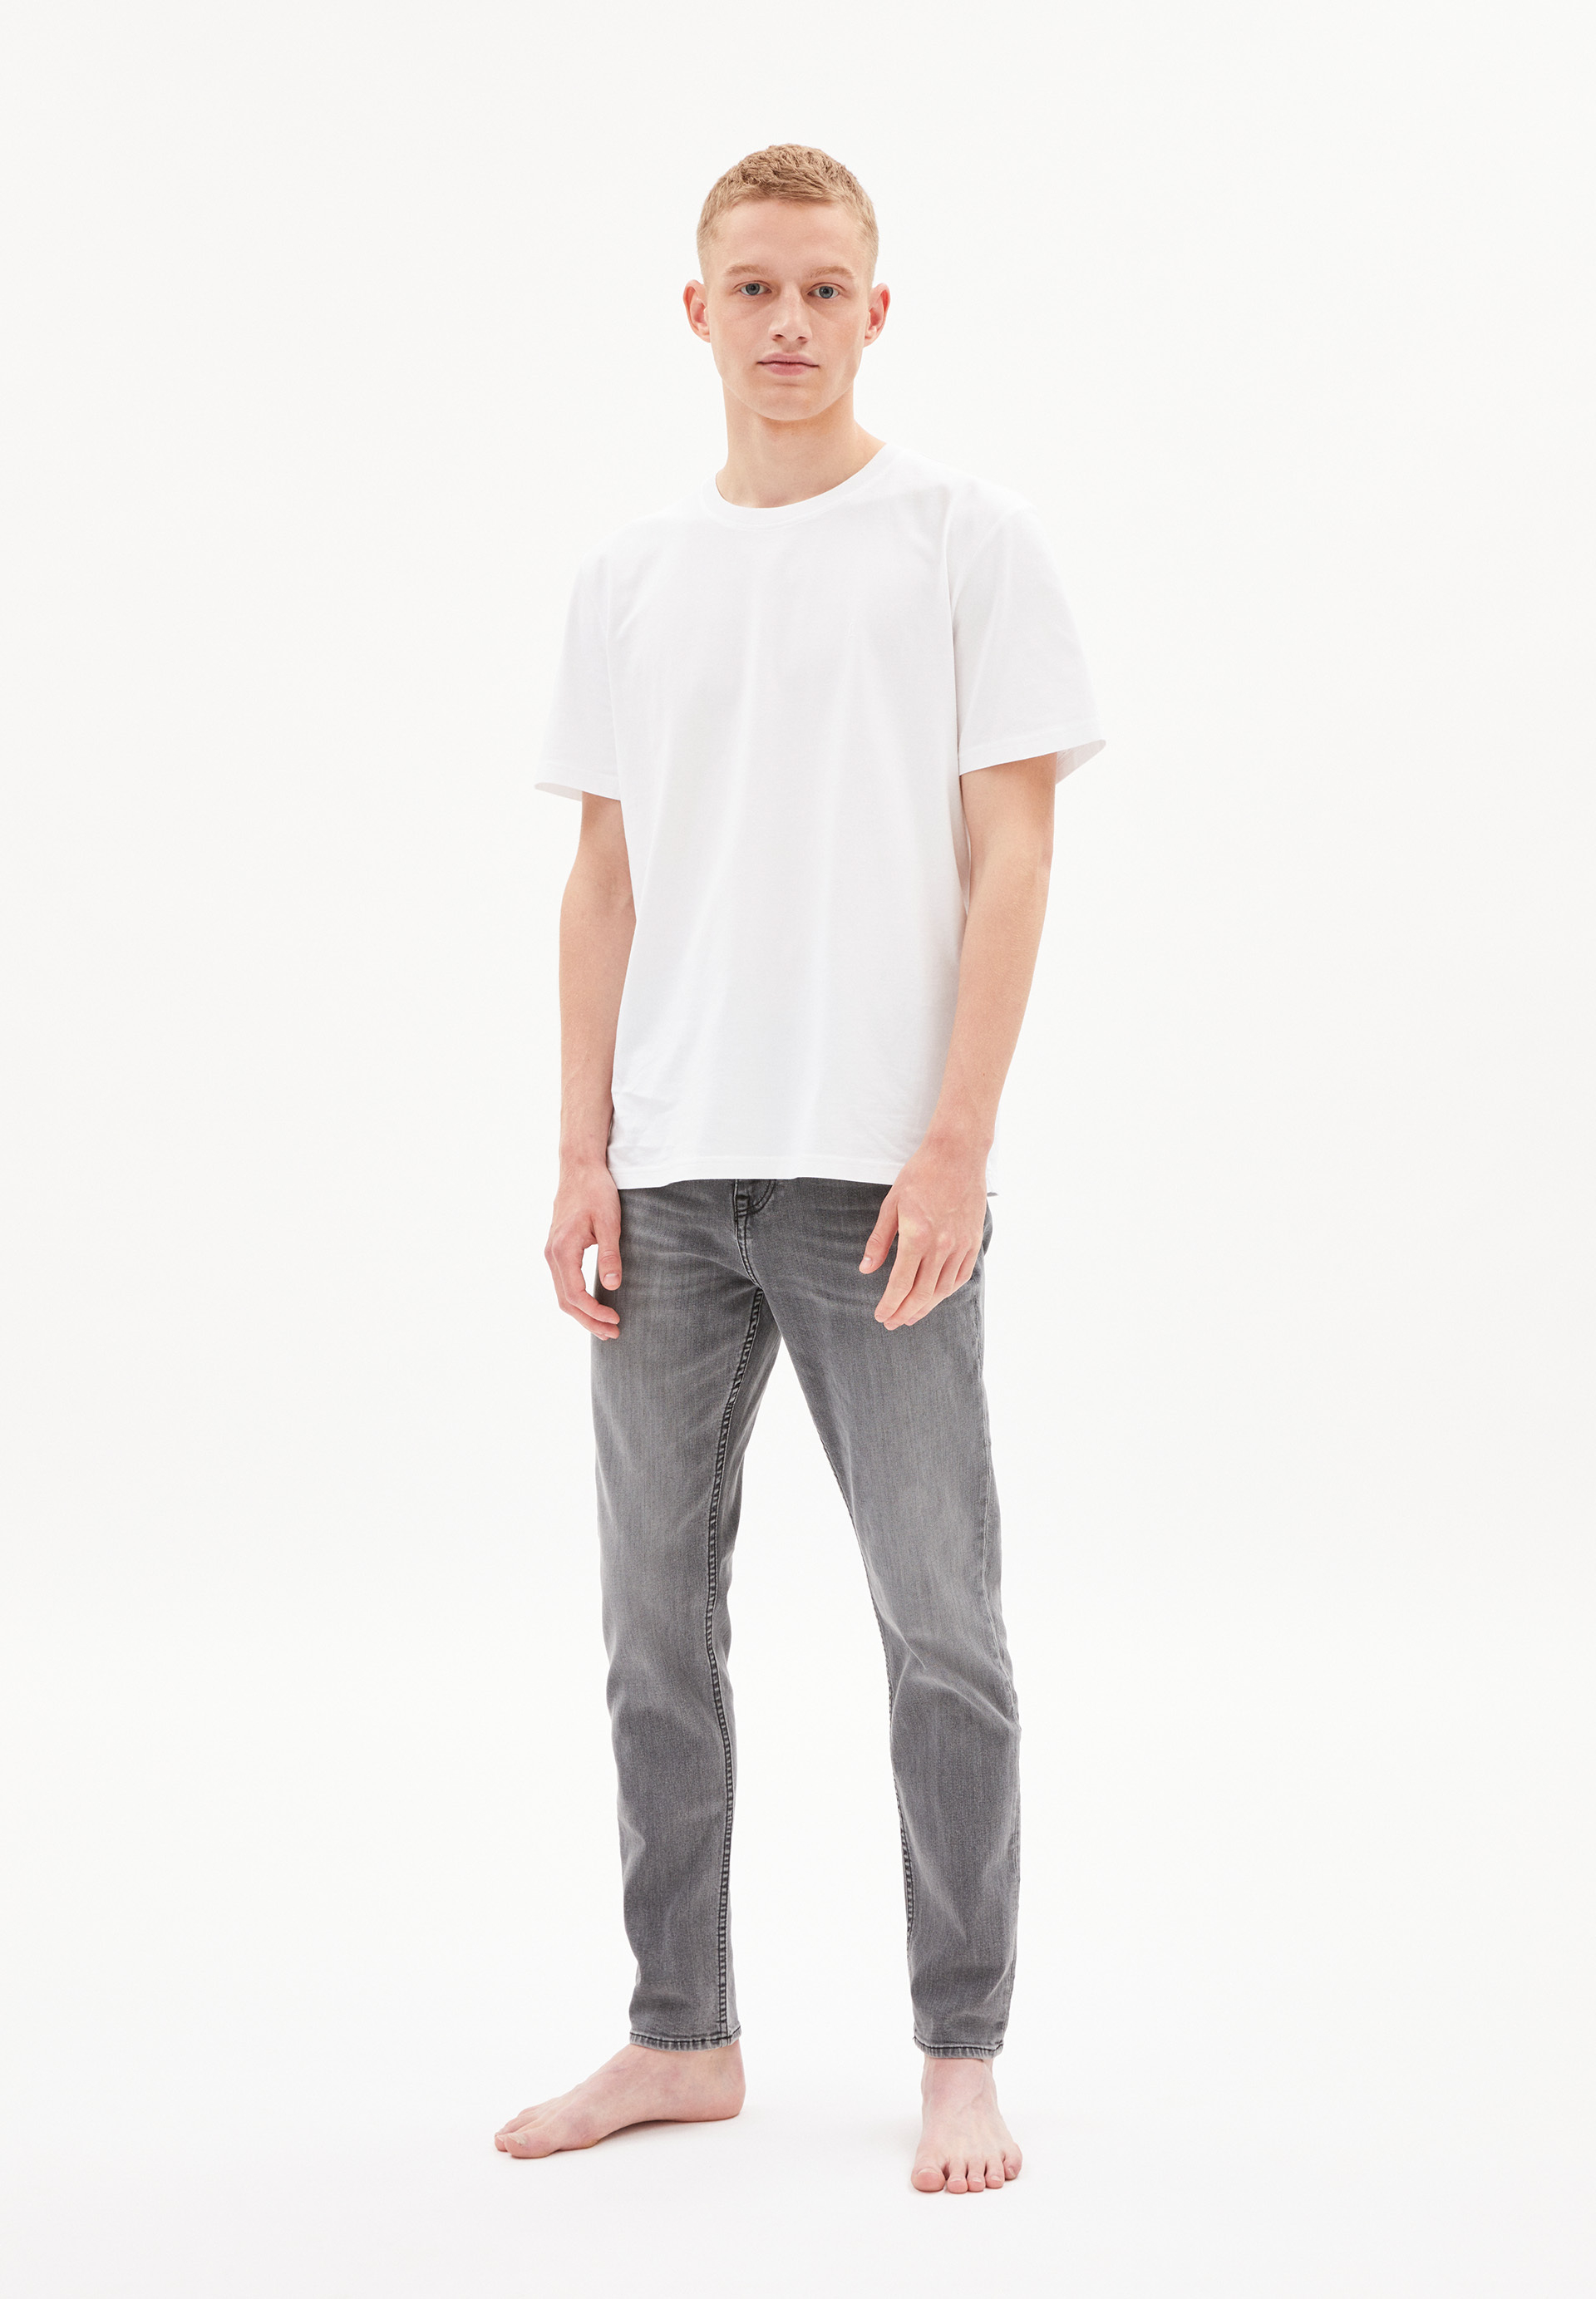 AARJO Tapered Fit Denim made of Organic Cotton Mix